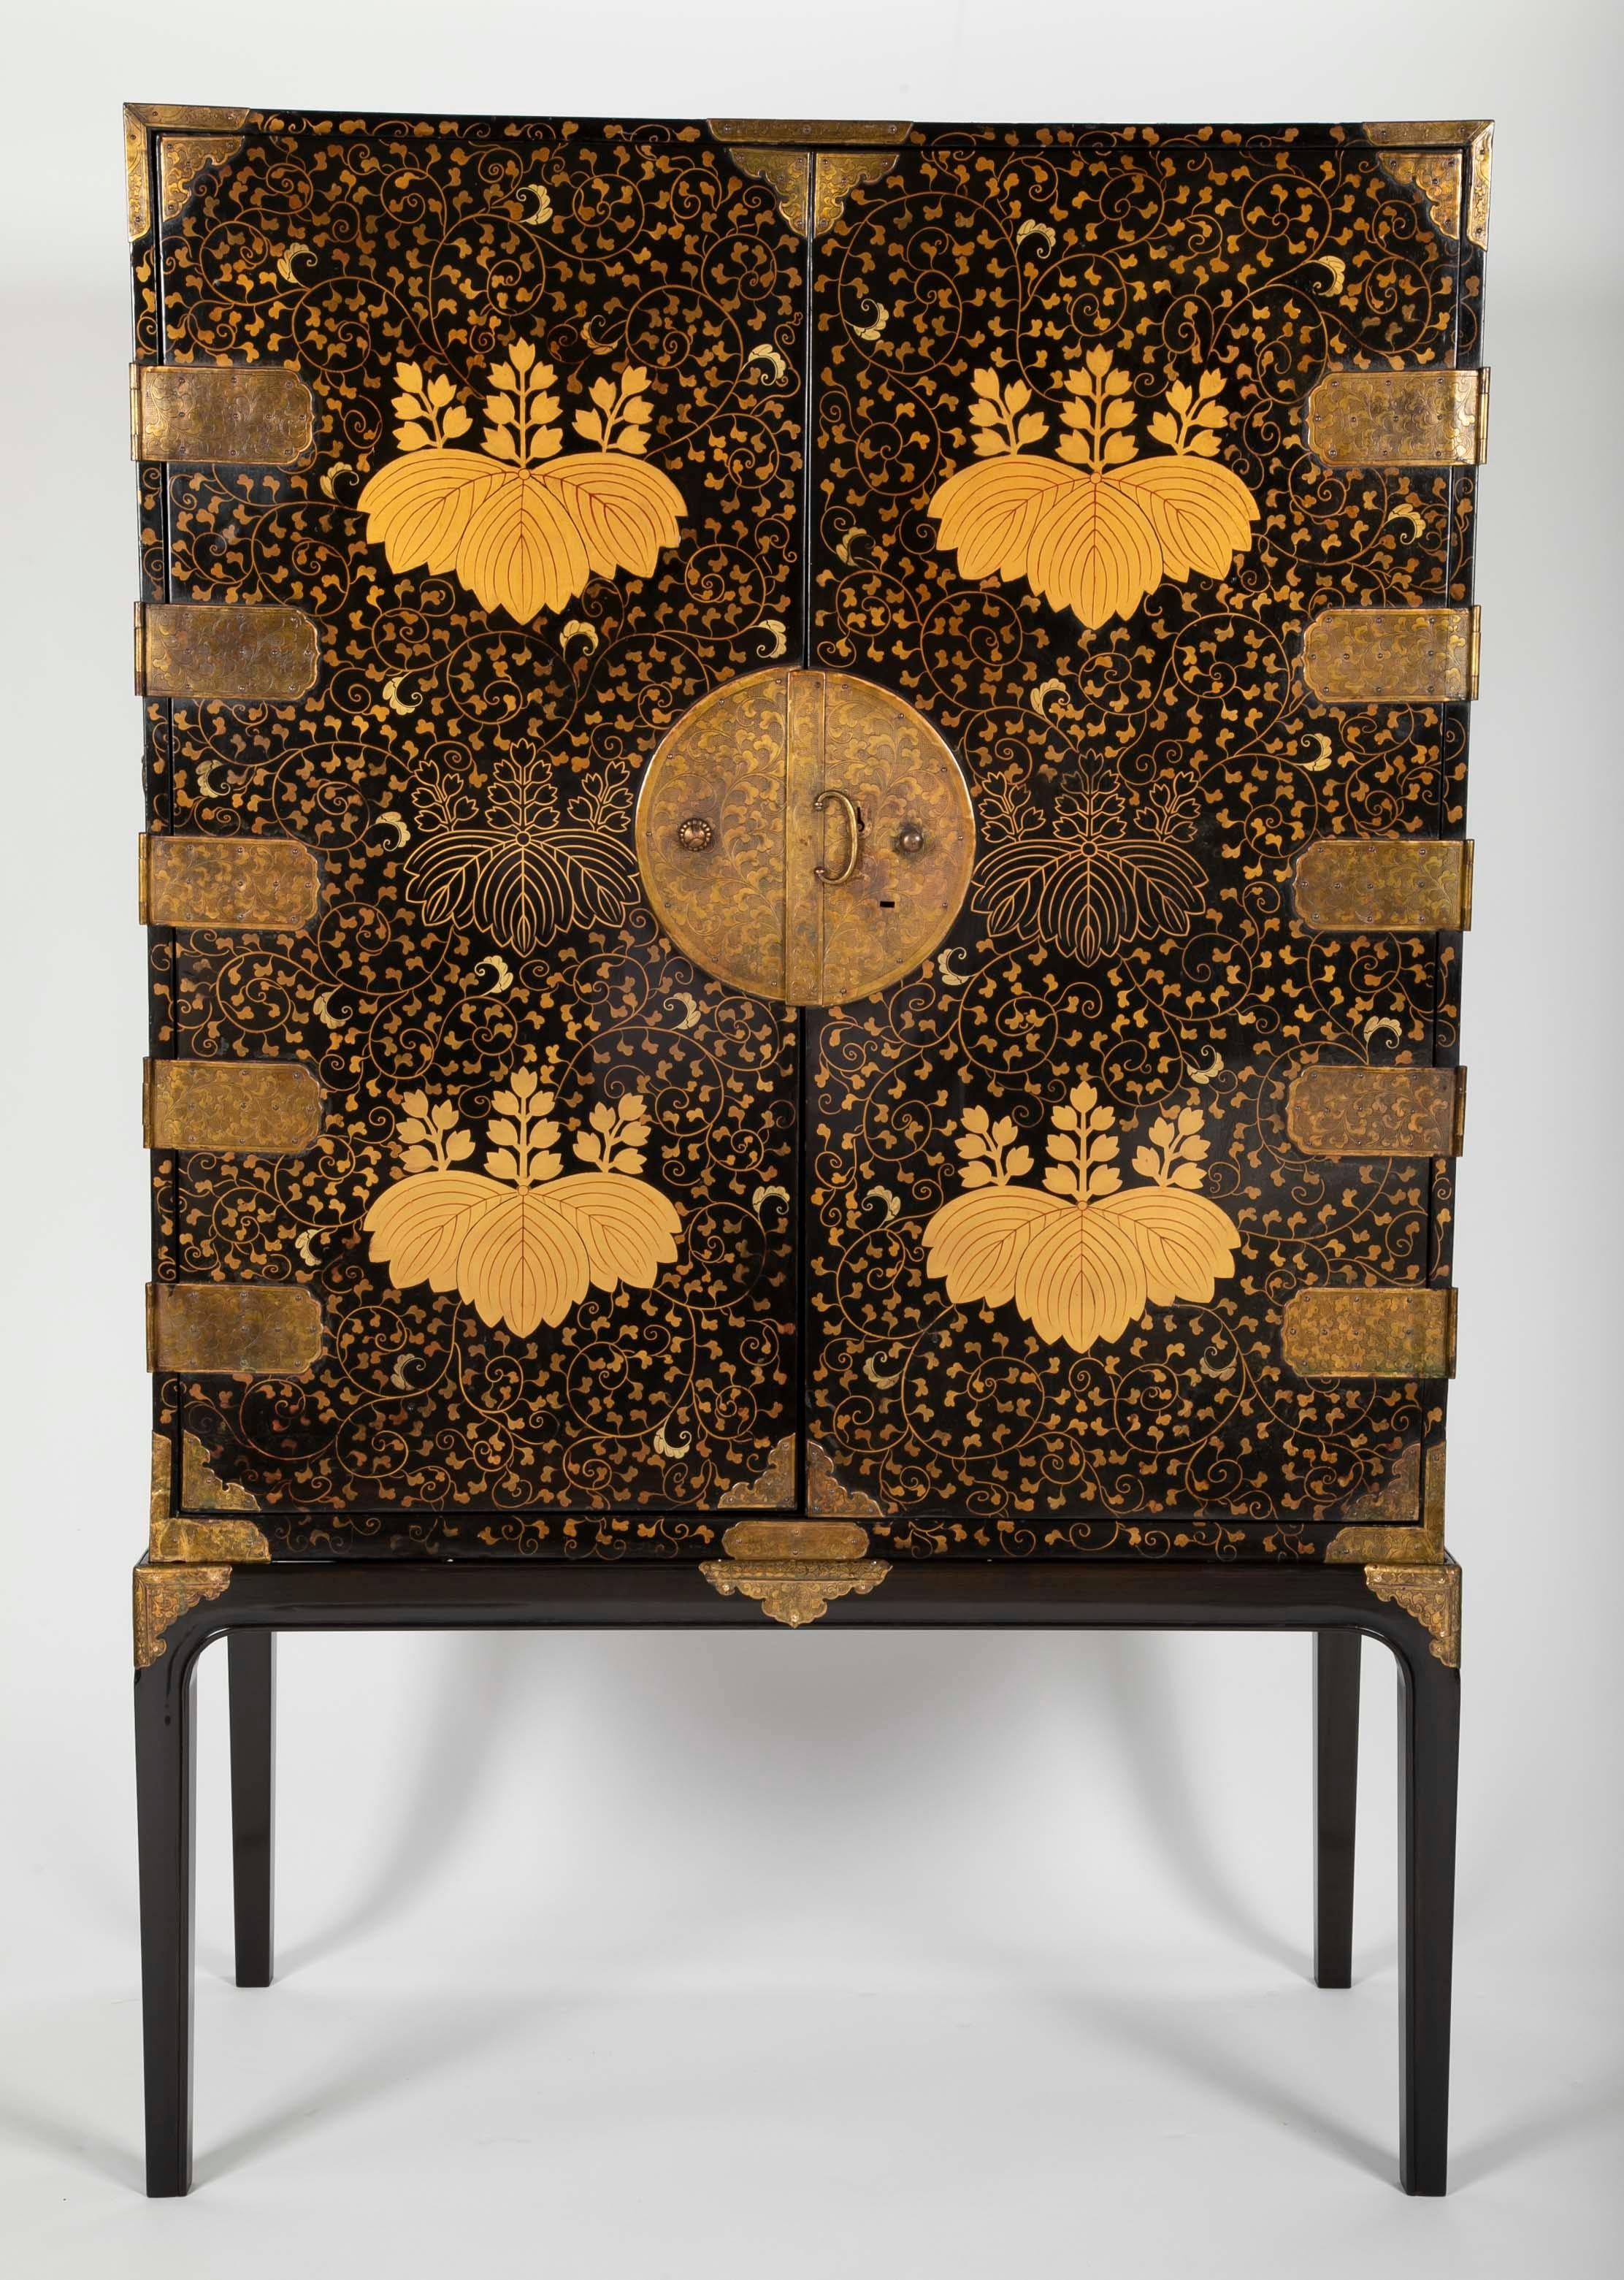 A large Japanese black and gold lacquered cabinet with Toyotomi mon and vine decorations. Mounted with gilt and etched bronze hardware. Later stand also mounted with period hardware. Drawers lined with Japanese paper depicting clouds and one